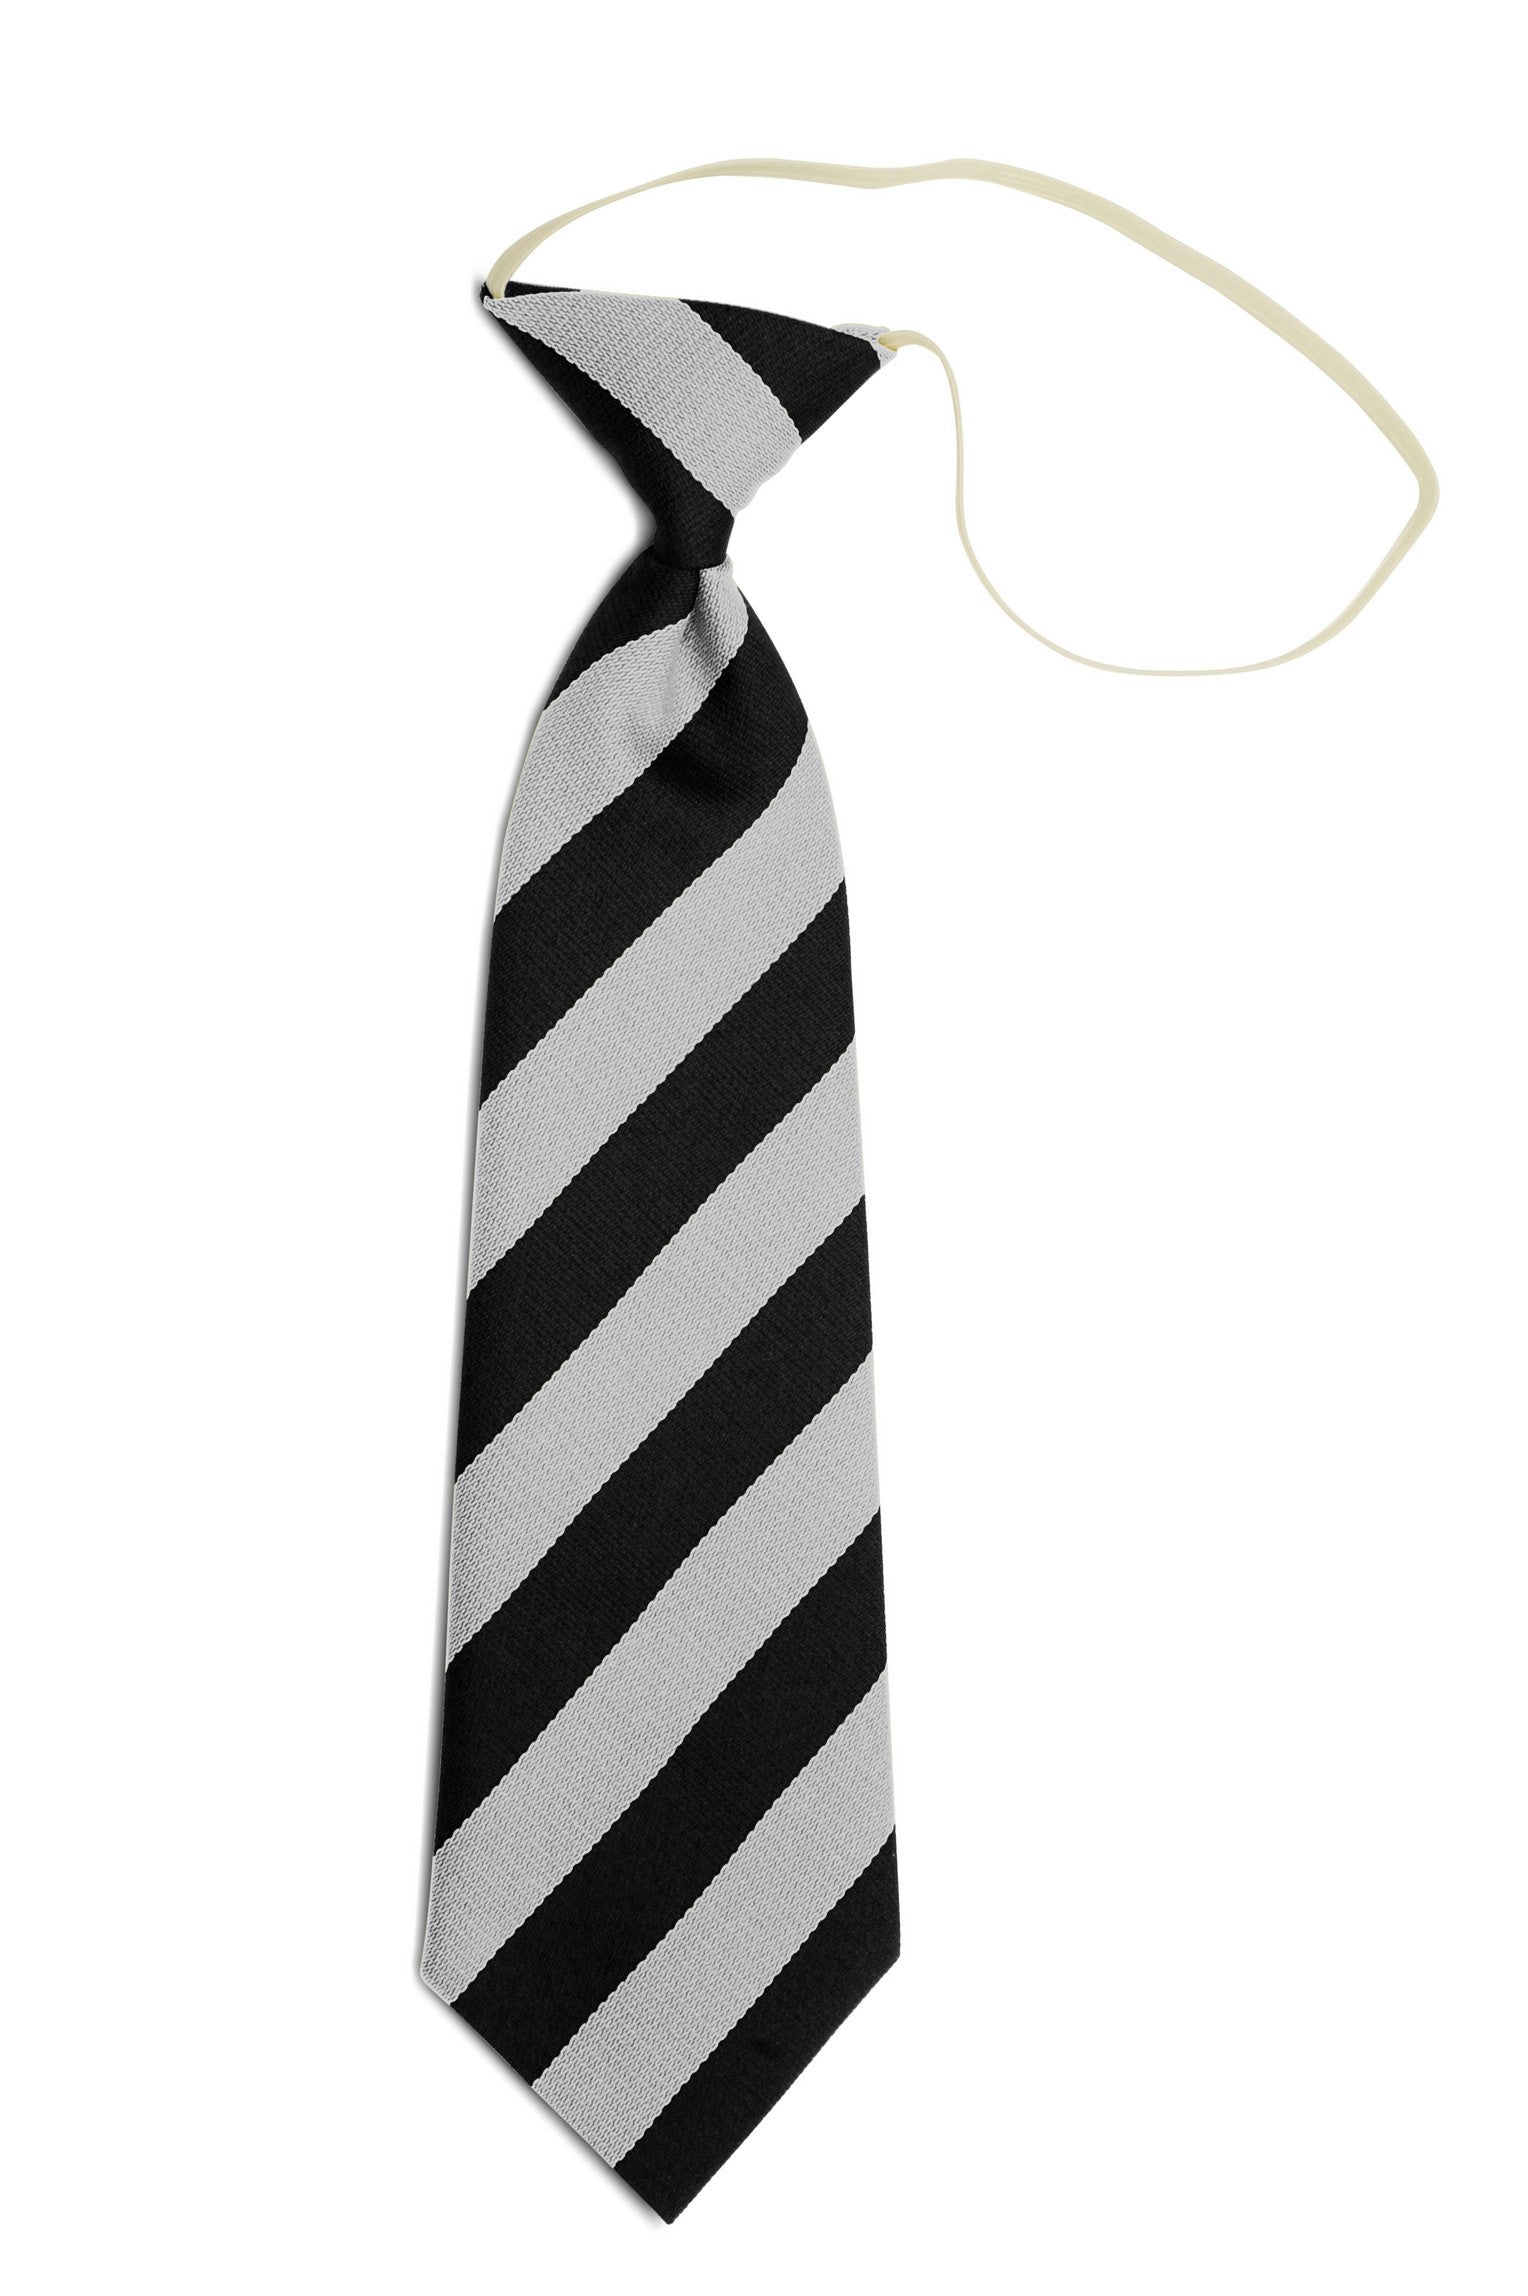 Stock Design Ties in Black and White Equal Stripe (5404-9501) - Lynendo Trade Store